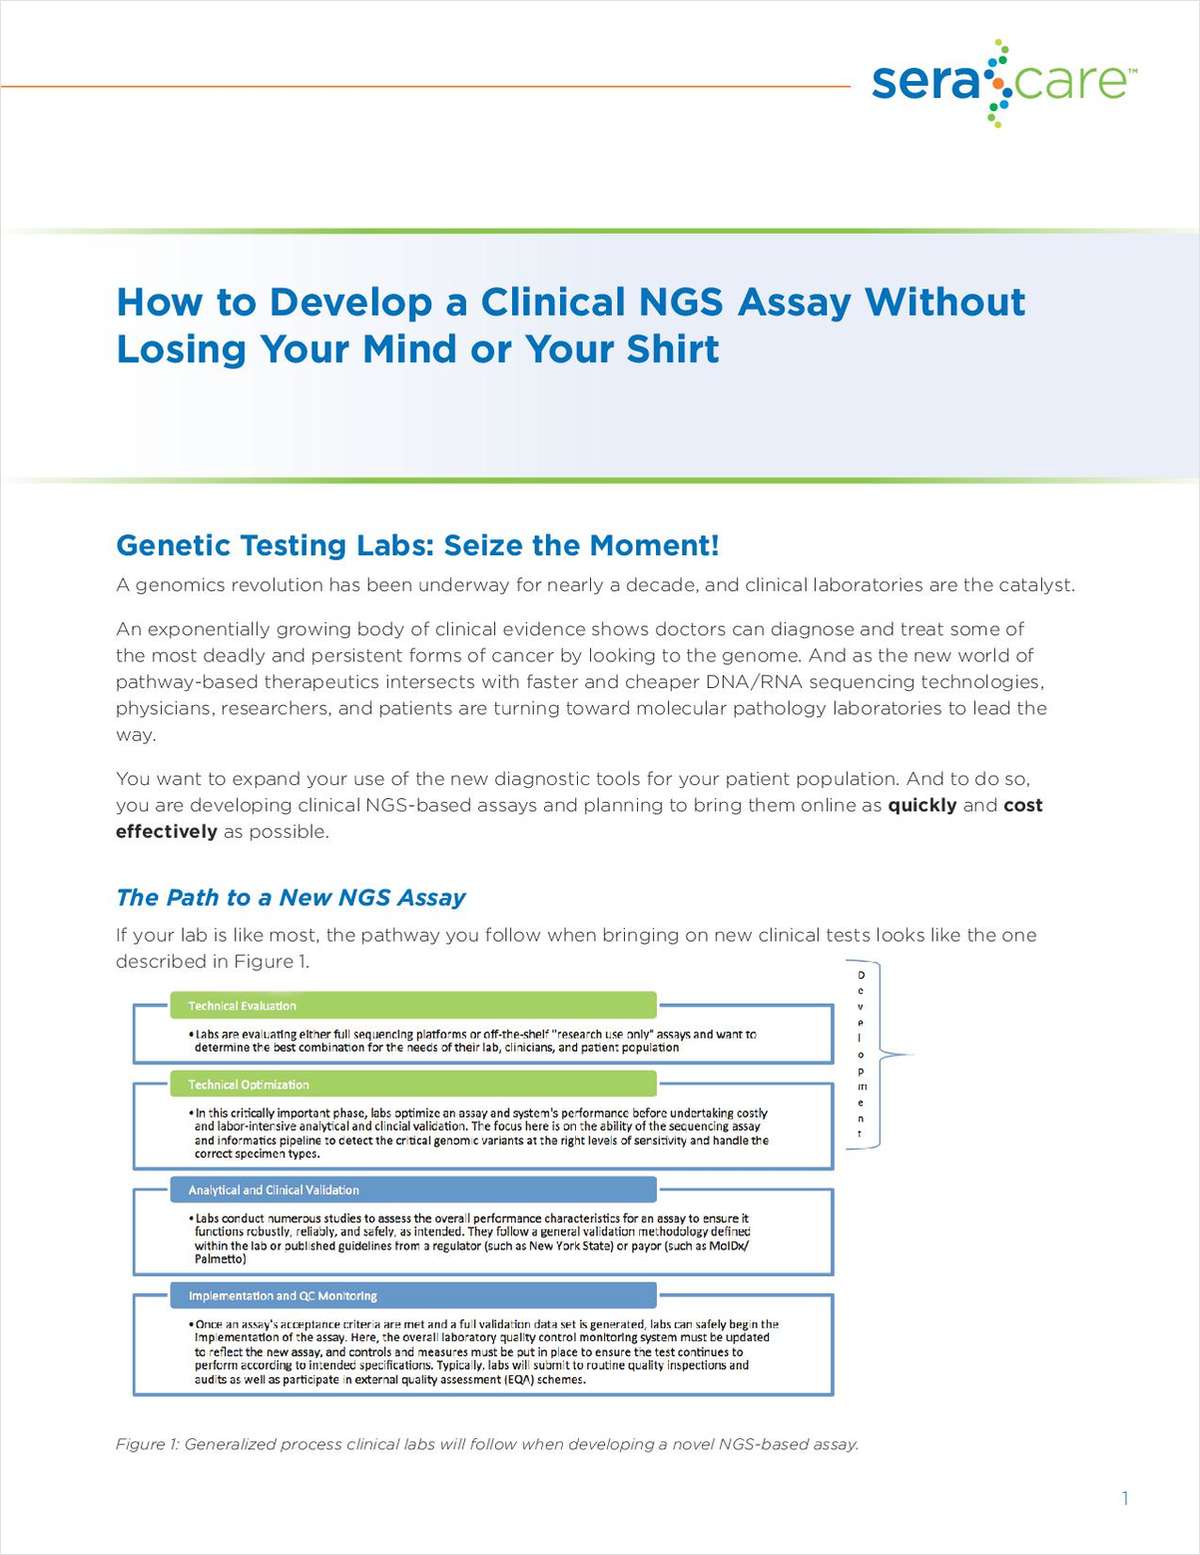 How to Develop a Clinical NGS Assay Without Losing Your Mind or Your Shirt